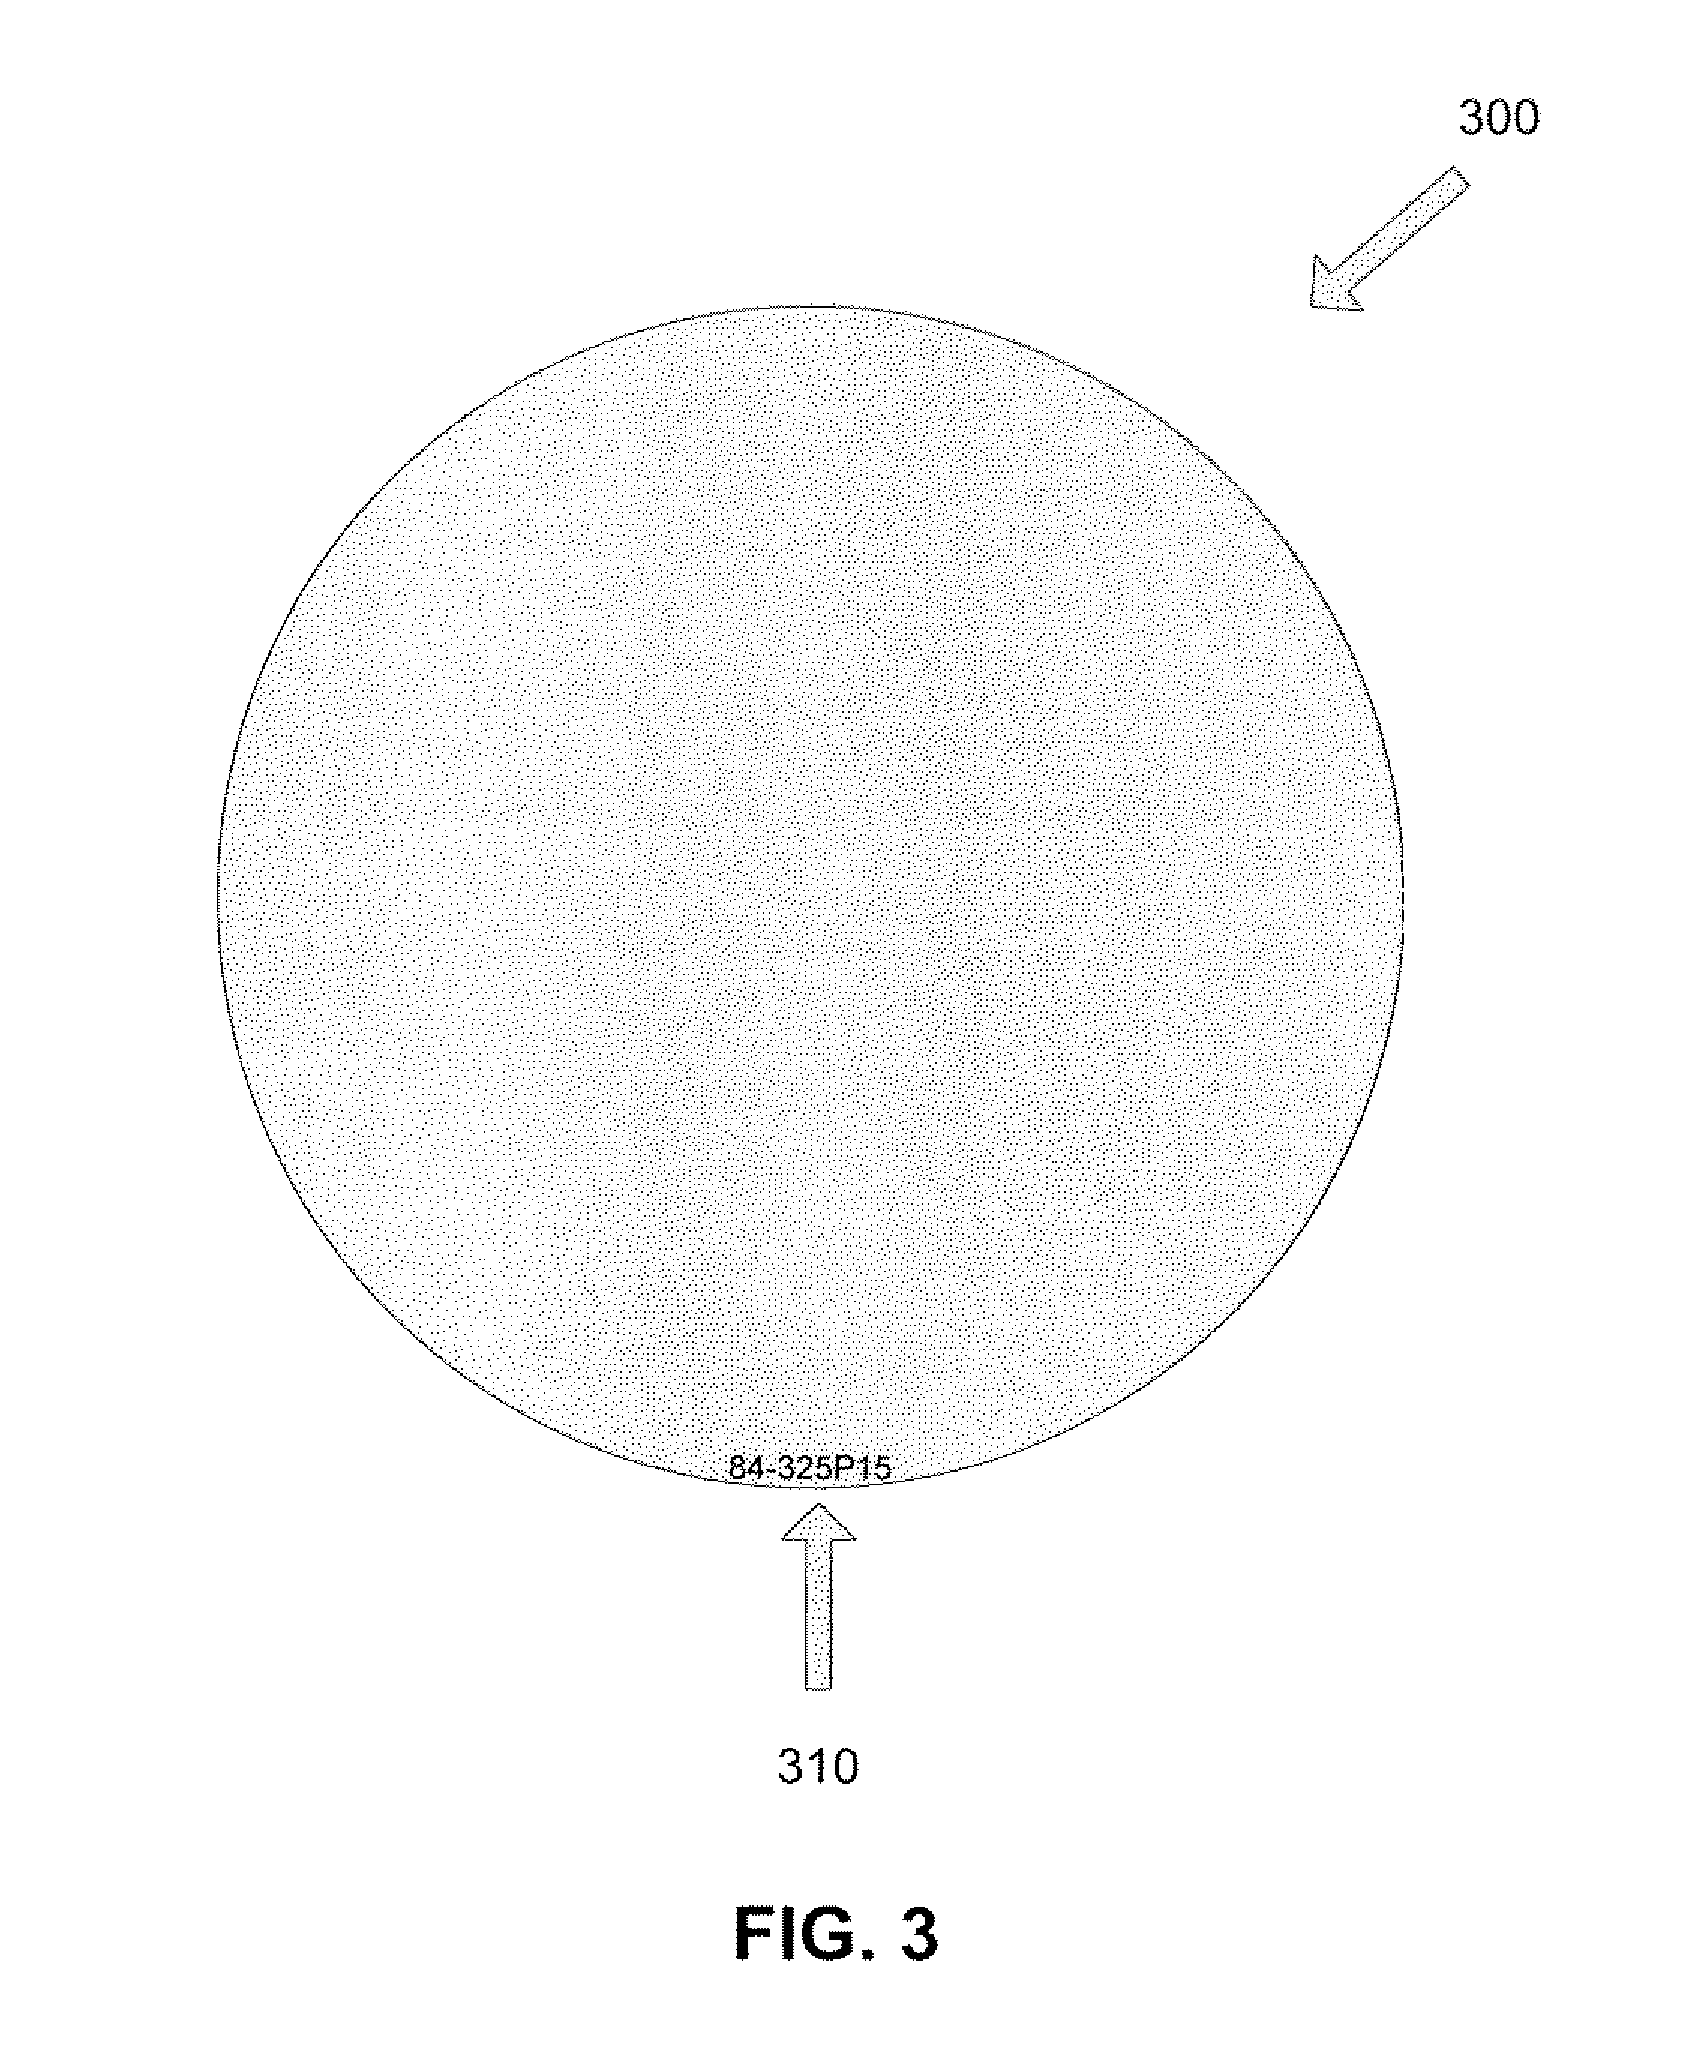 Kit of higher order aberration contact lenses and methods of use